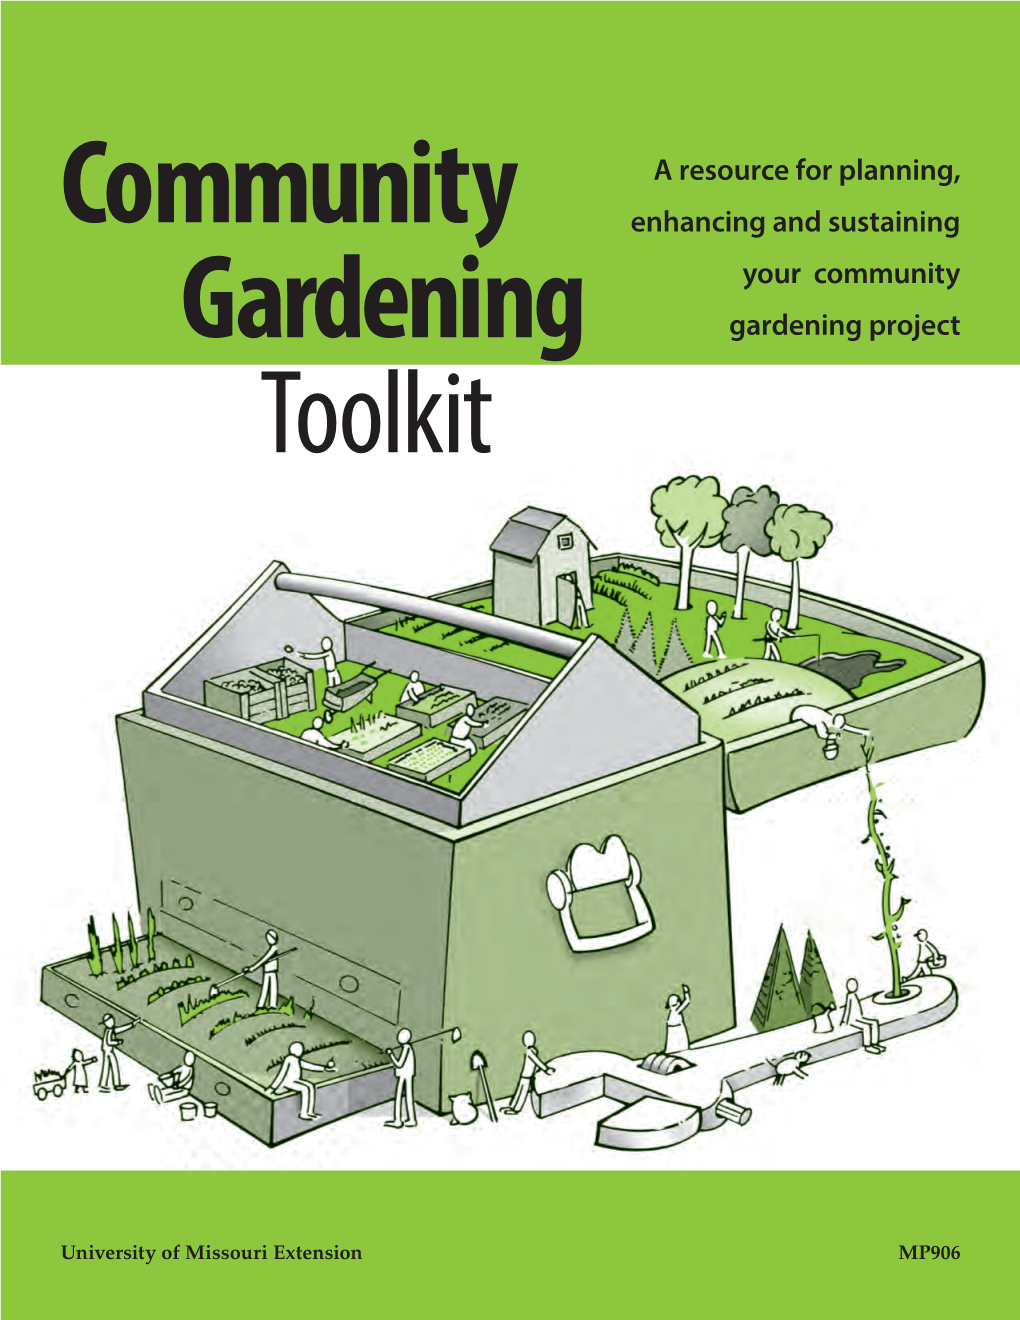 A Resource for Planning, Enhancing and Sustaining Your Community